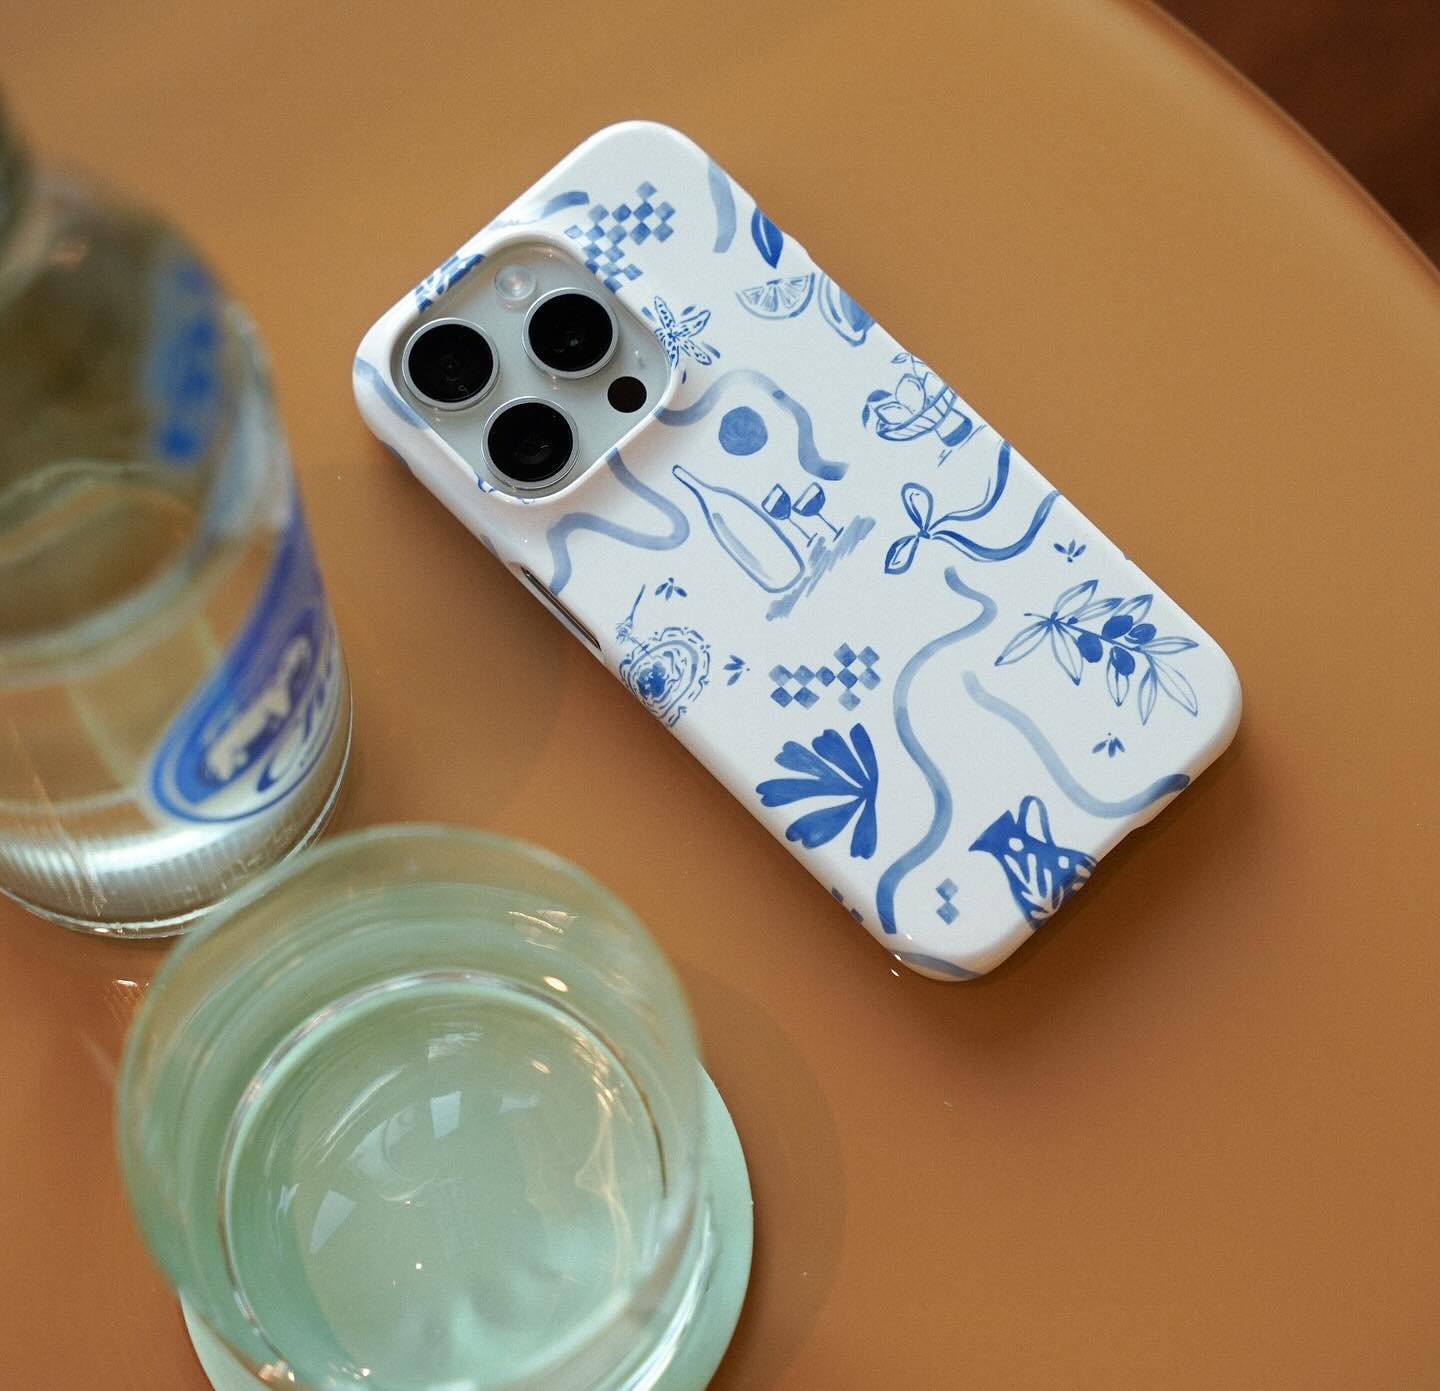 The &lsquo;Mediterranean Wave&rsquo; print brings a little bit of holiday to your tech essentials, available now at the @thedairy 💙
.
.
.
#surfacepatternprint #meditteraneanfood #blueandwhitedecor #blueandwhiteporcelain #holidayfood #phonecasedesign